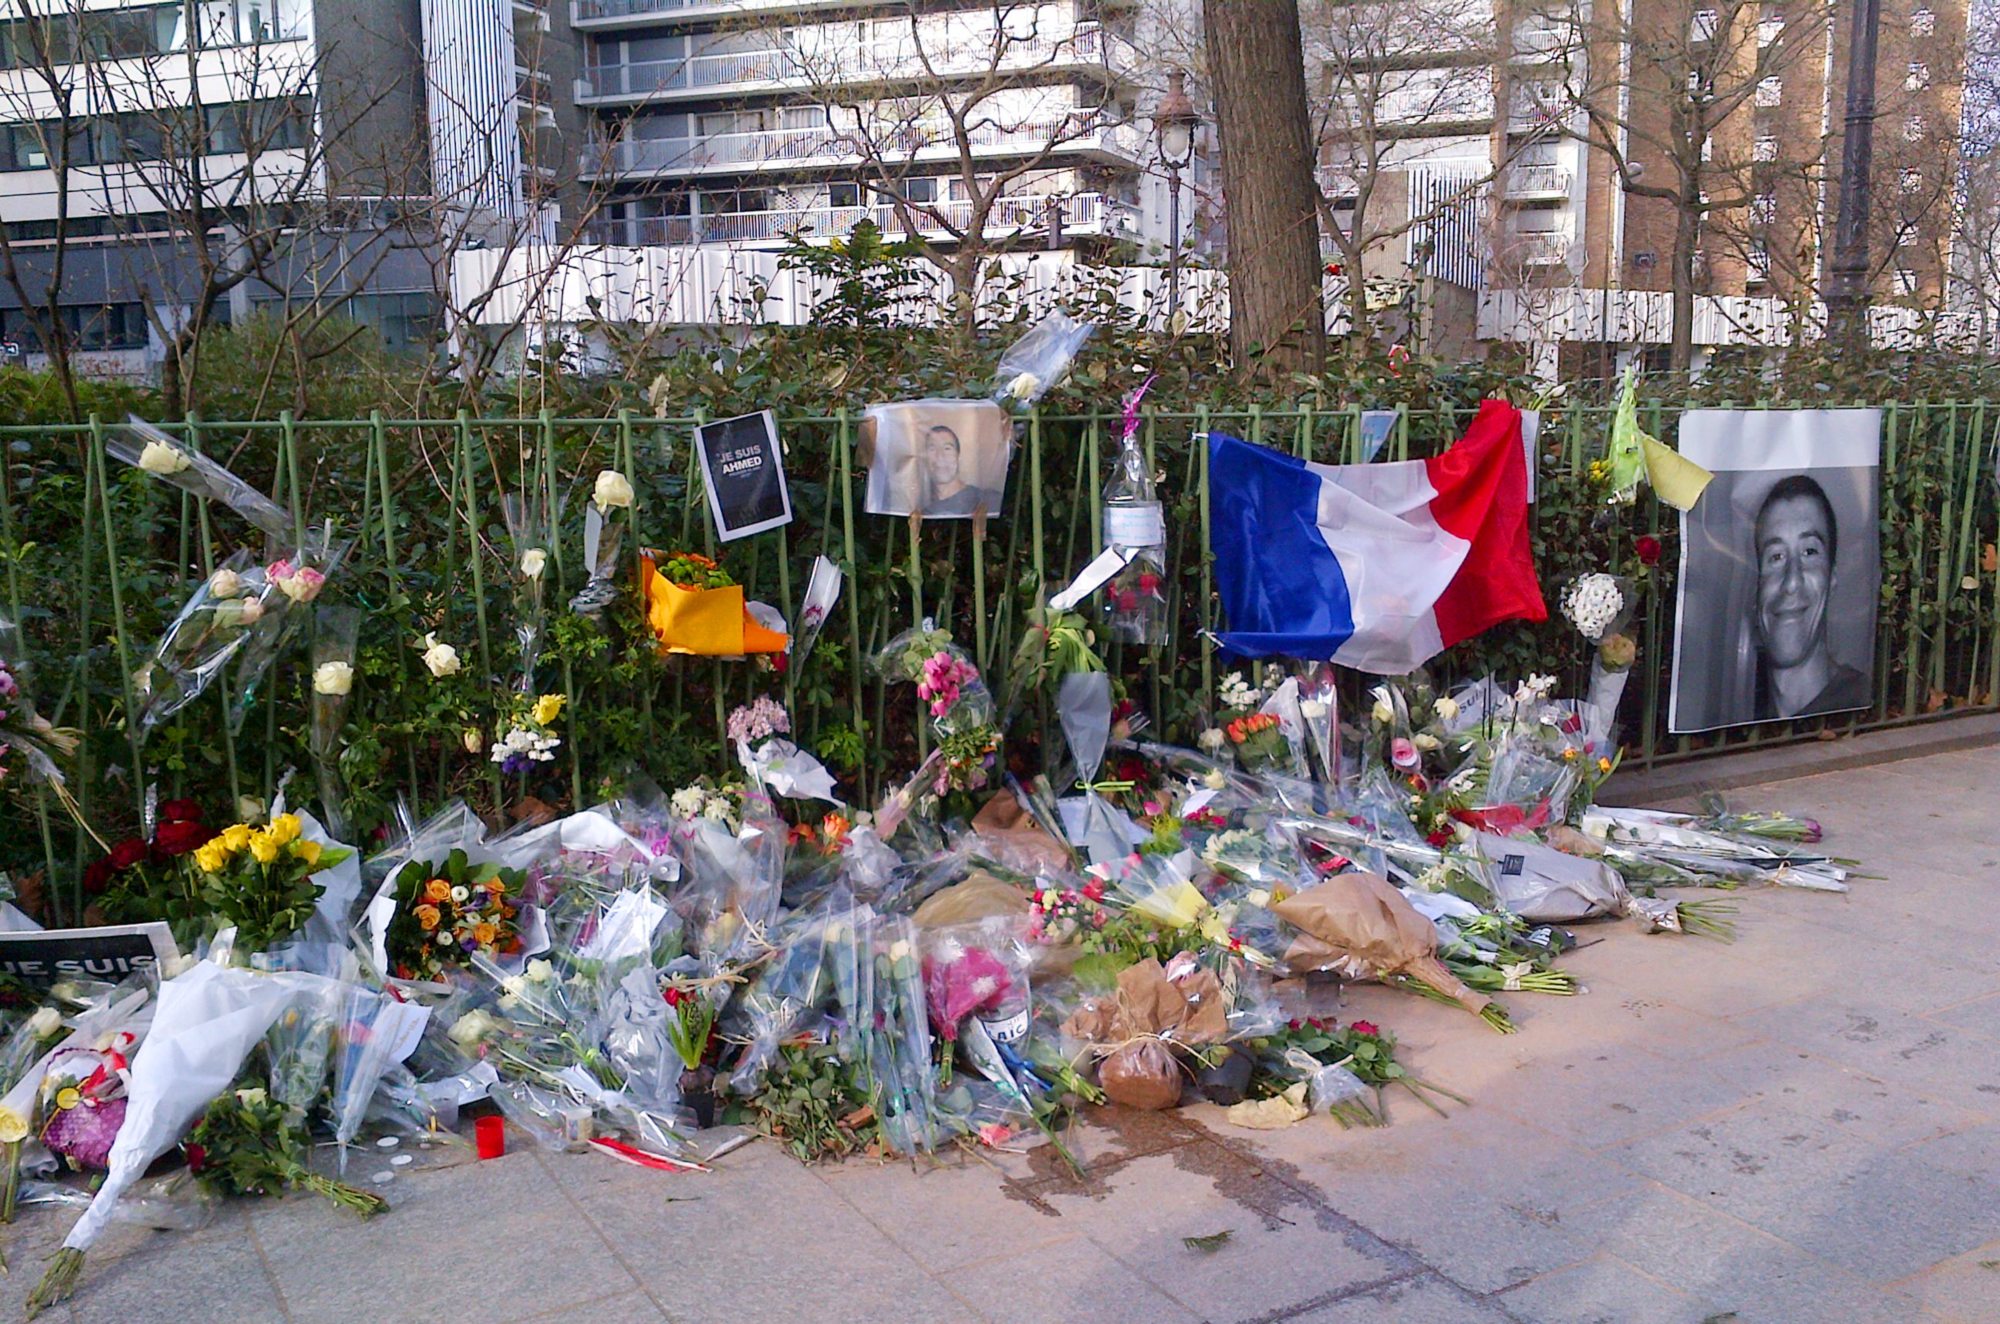 A portrait of Ahmed Merabet, the French policeman killed during the attack on Charlie Hebdo Magazine, is displayed with flowers and other tributes on 11 January 2015 in Paris (AFP)